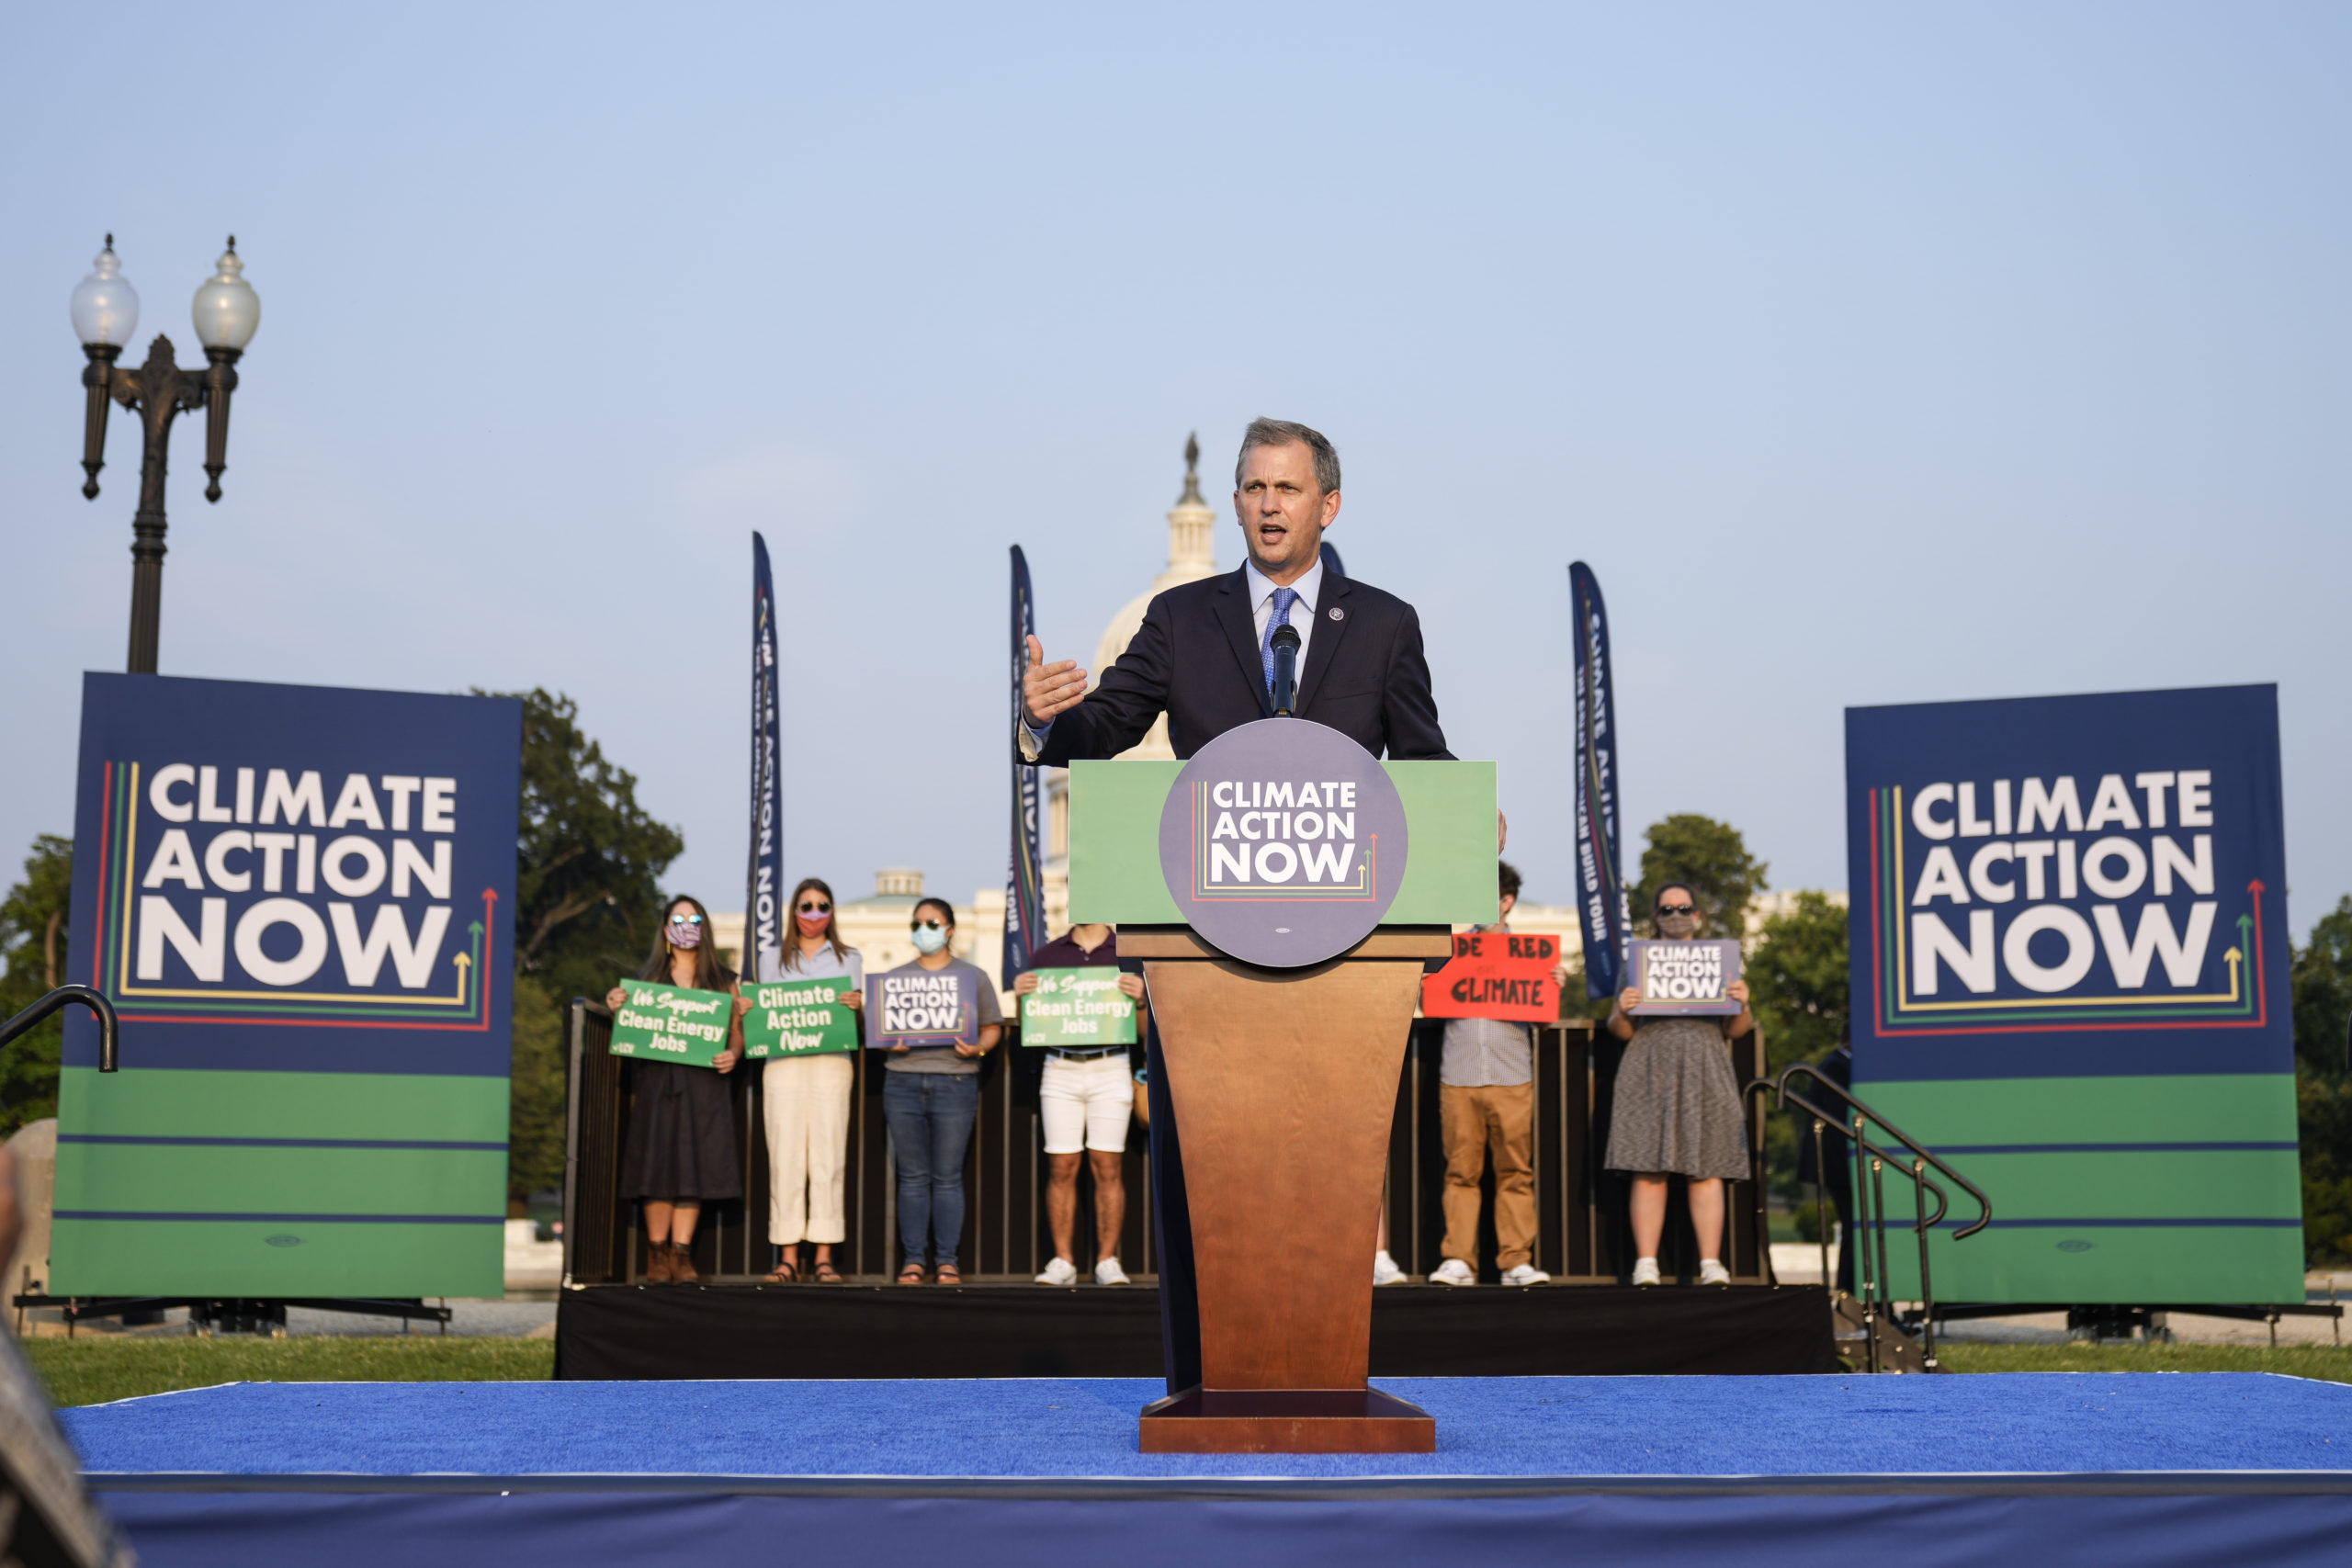 Rep. Sean Casten speaks during a rally about climate change on Sept. 13 in Washington, D.C. (Drew Angerer/Getty Images)